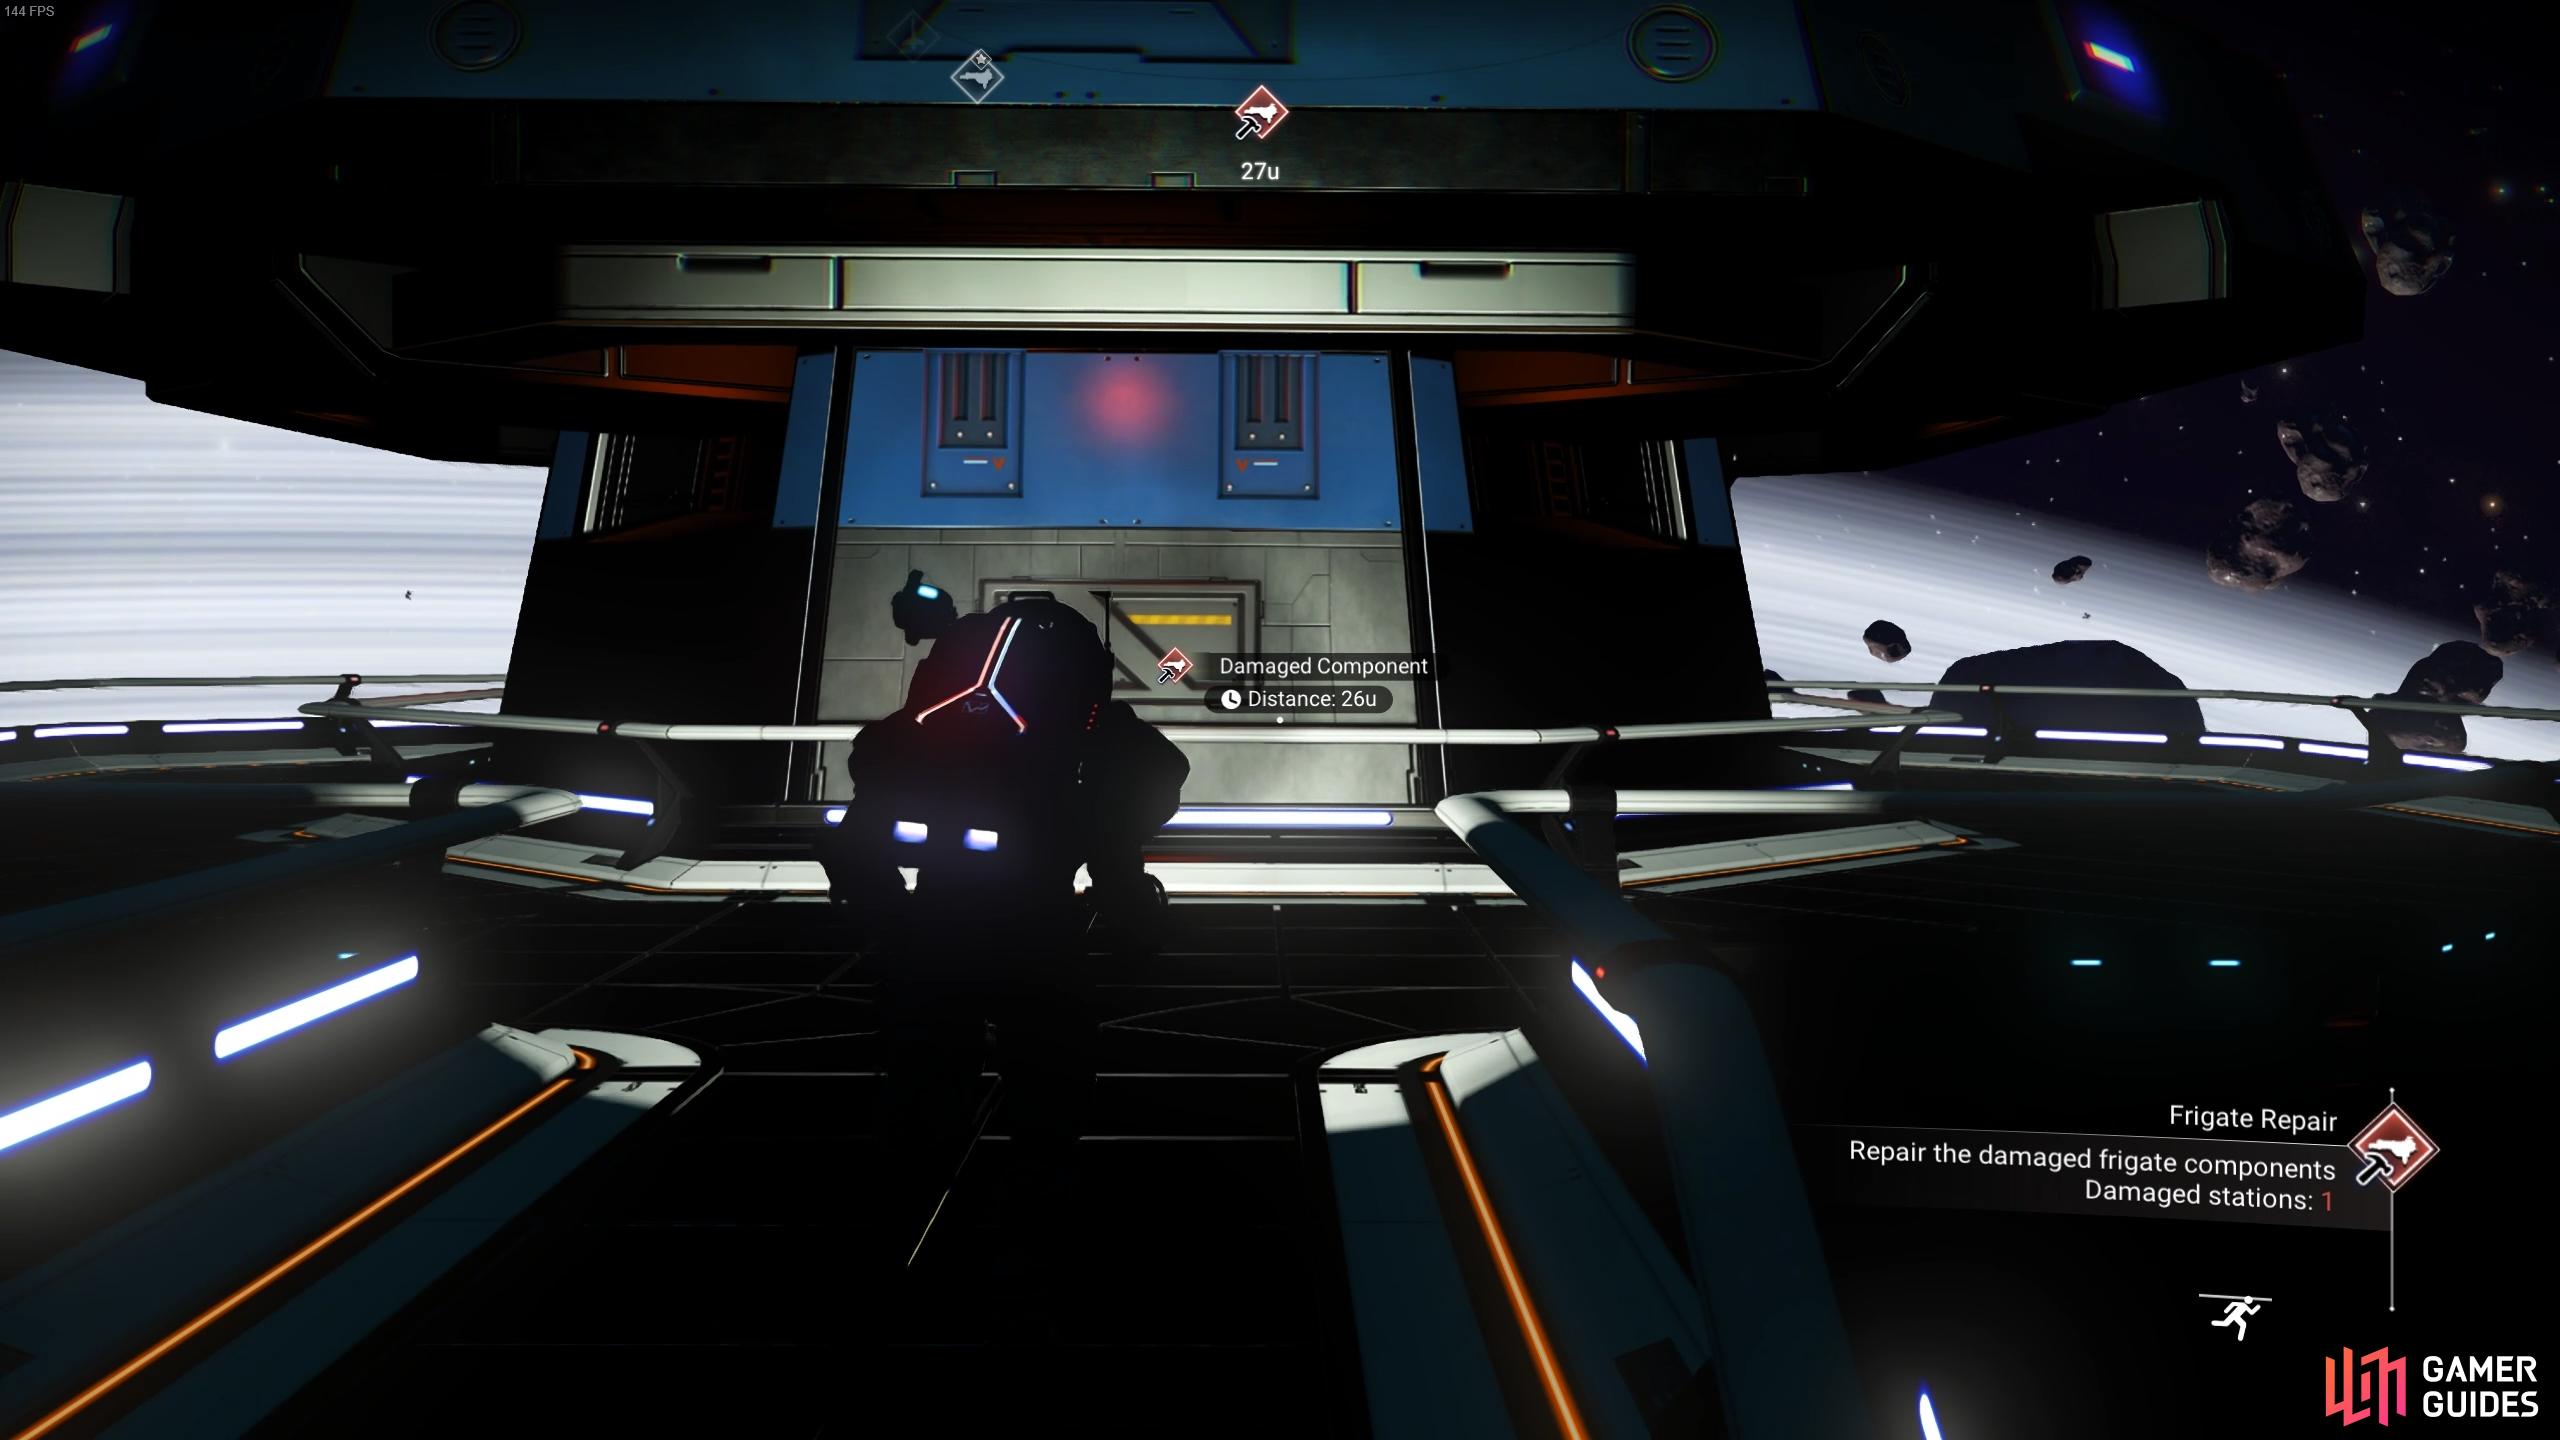 The damaged components on a Frigate will also be marked by a red icon, allowing you to find them quickly.